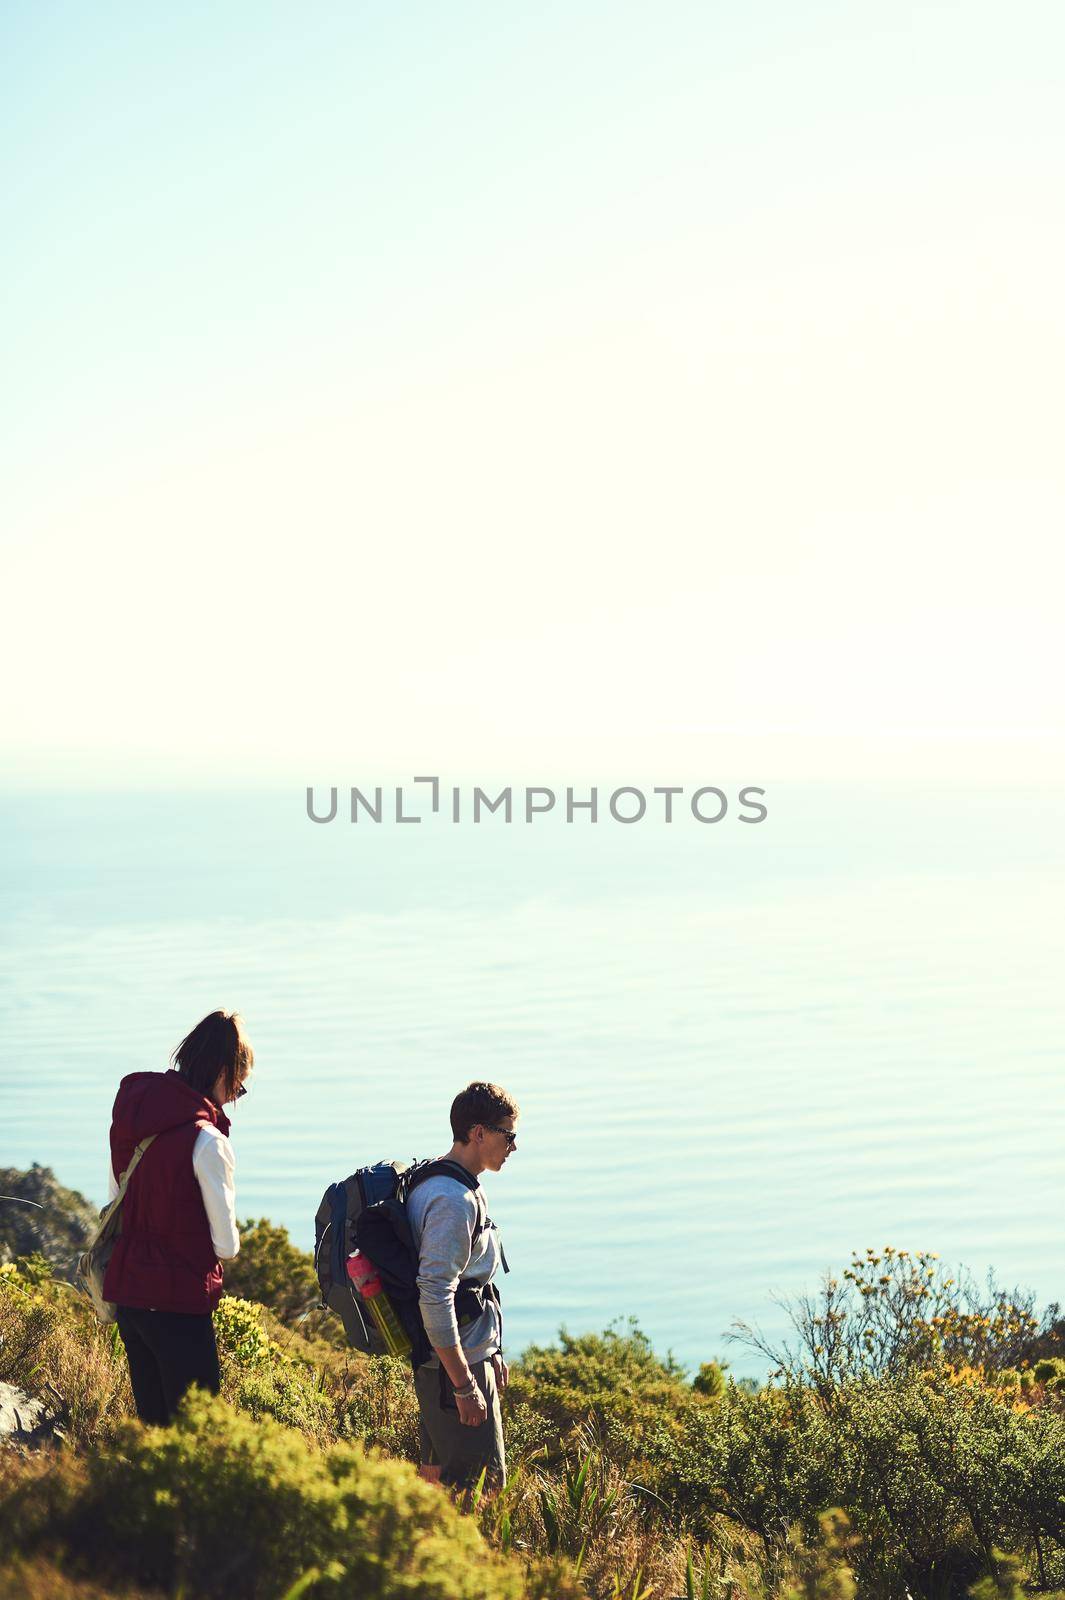 The mountains are calling. Shot of a young couple exploring the outdoors on a hiking trail. by YuriArcurs